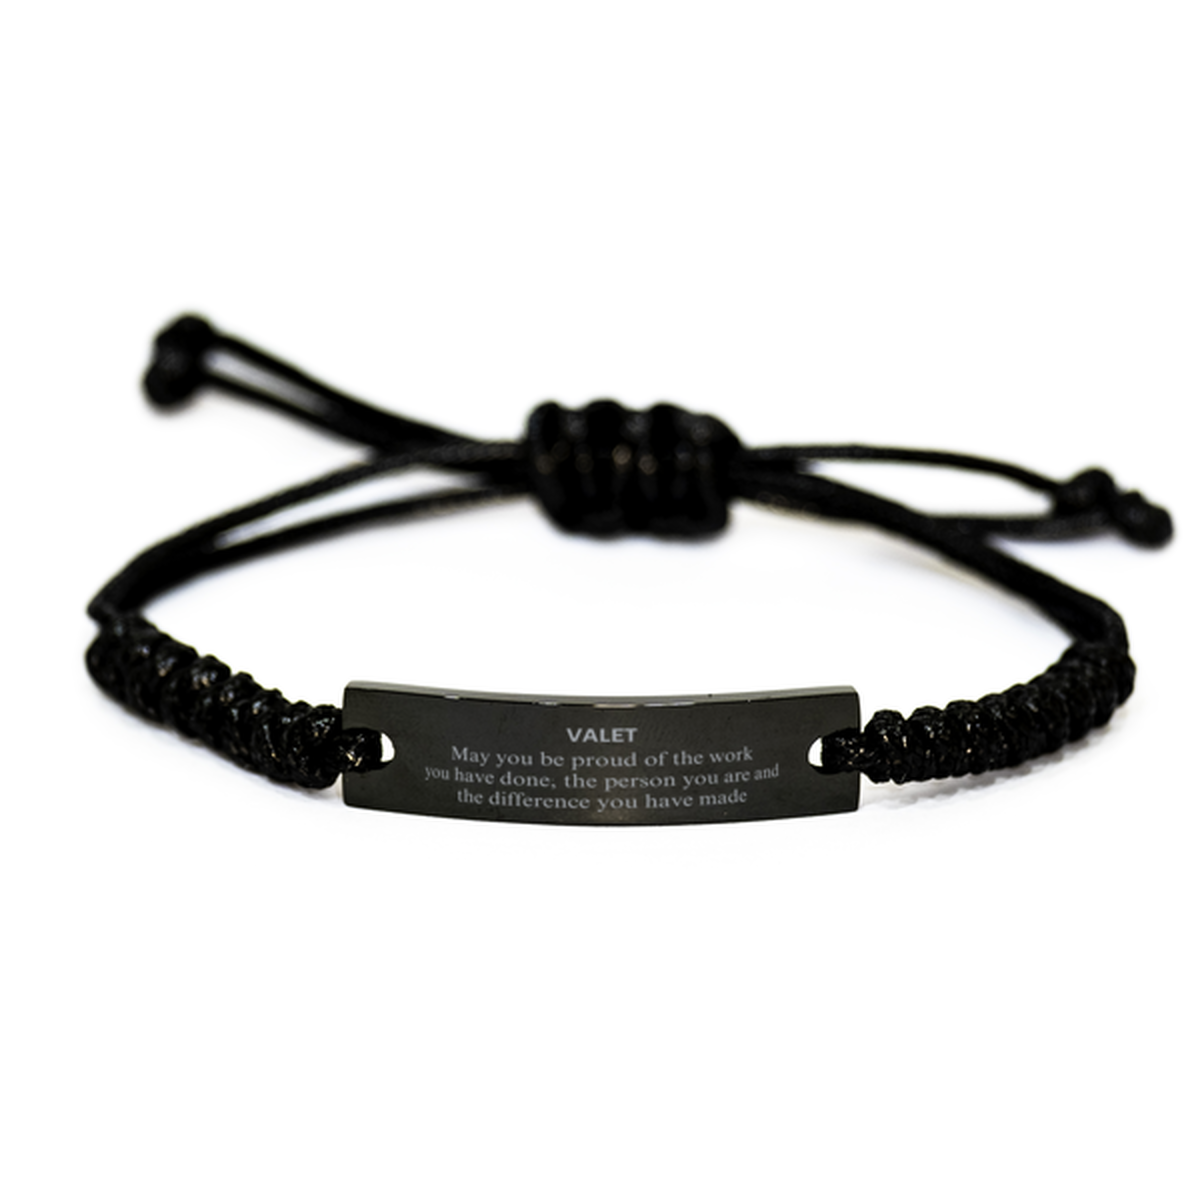 Valet May you be proud of the work you have done, Retirement Valet Black Rope Bracelet for Colleague Appreciation Gifts Amazing for Valet